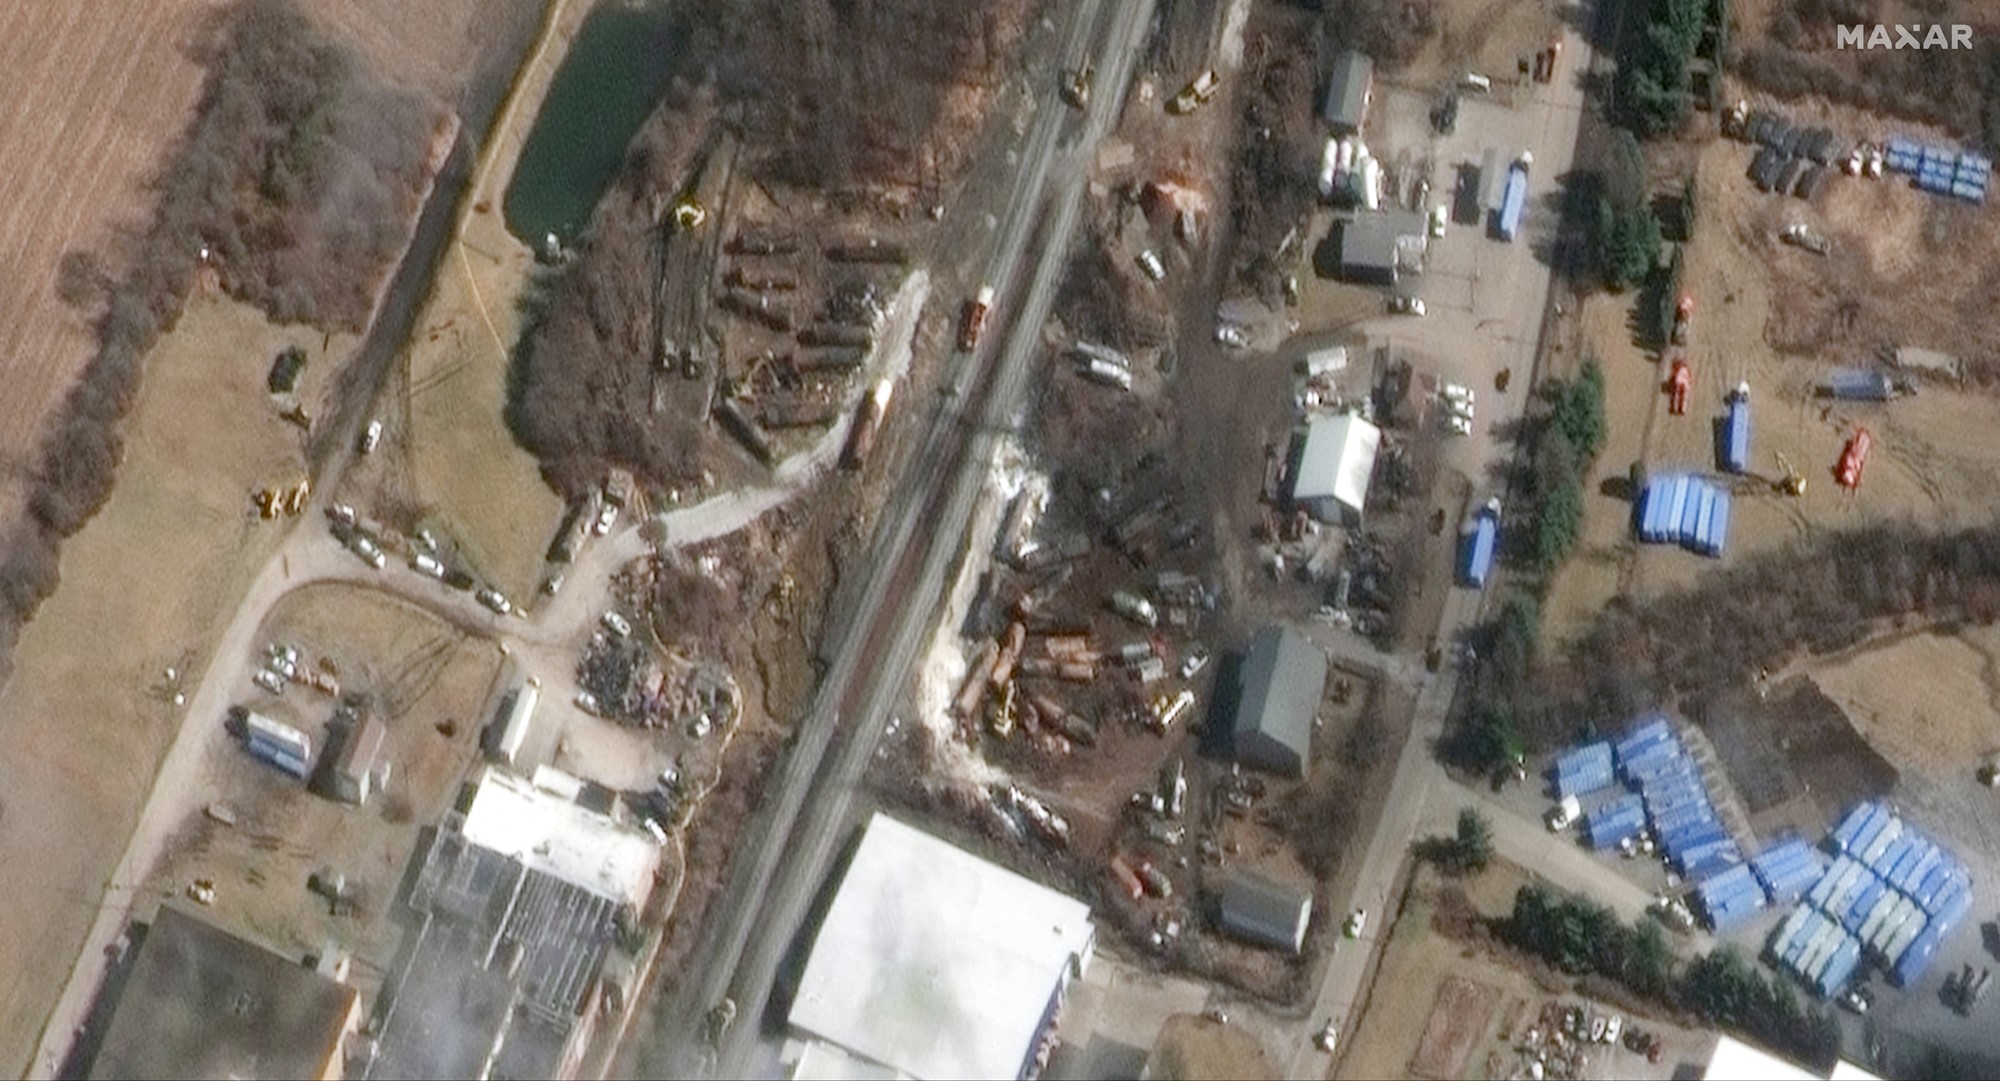 A satellite imag of a train yard where much of the ground has been burned. 